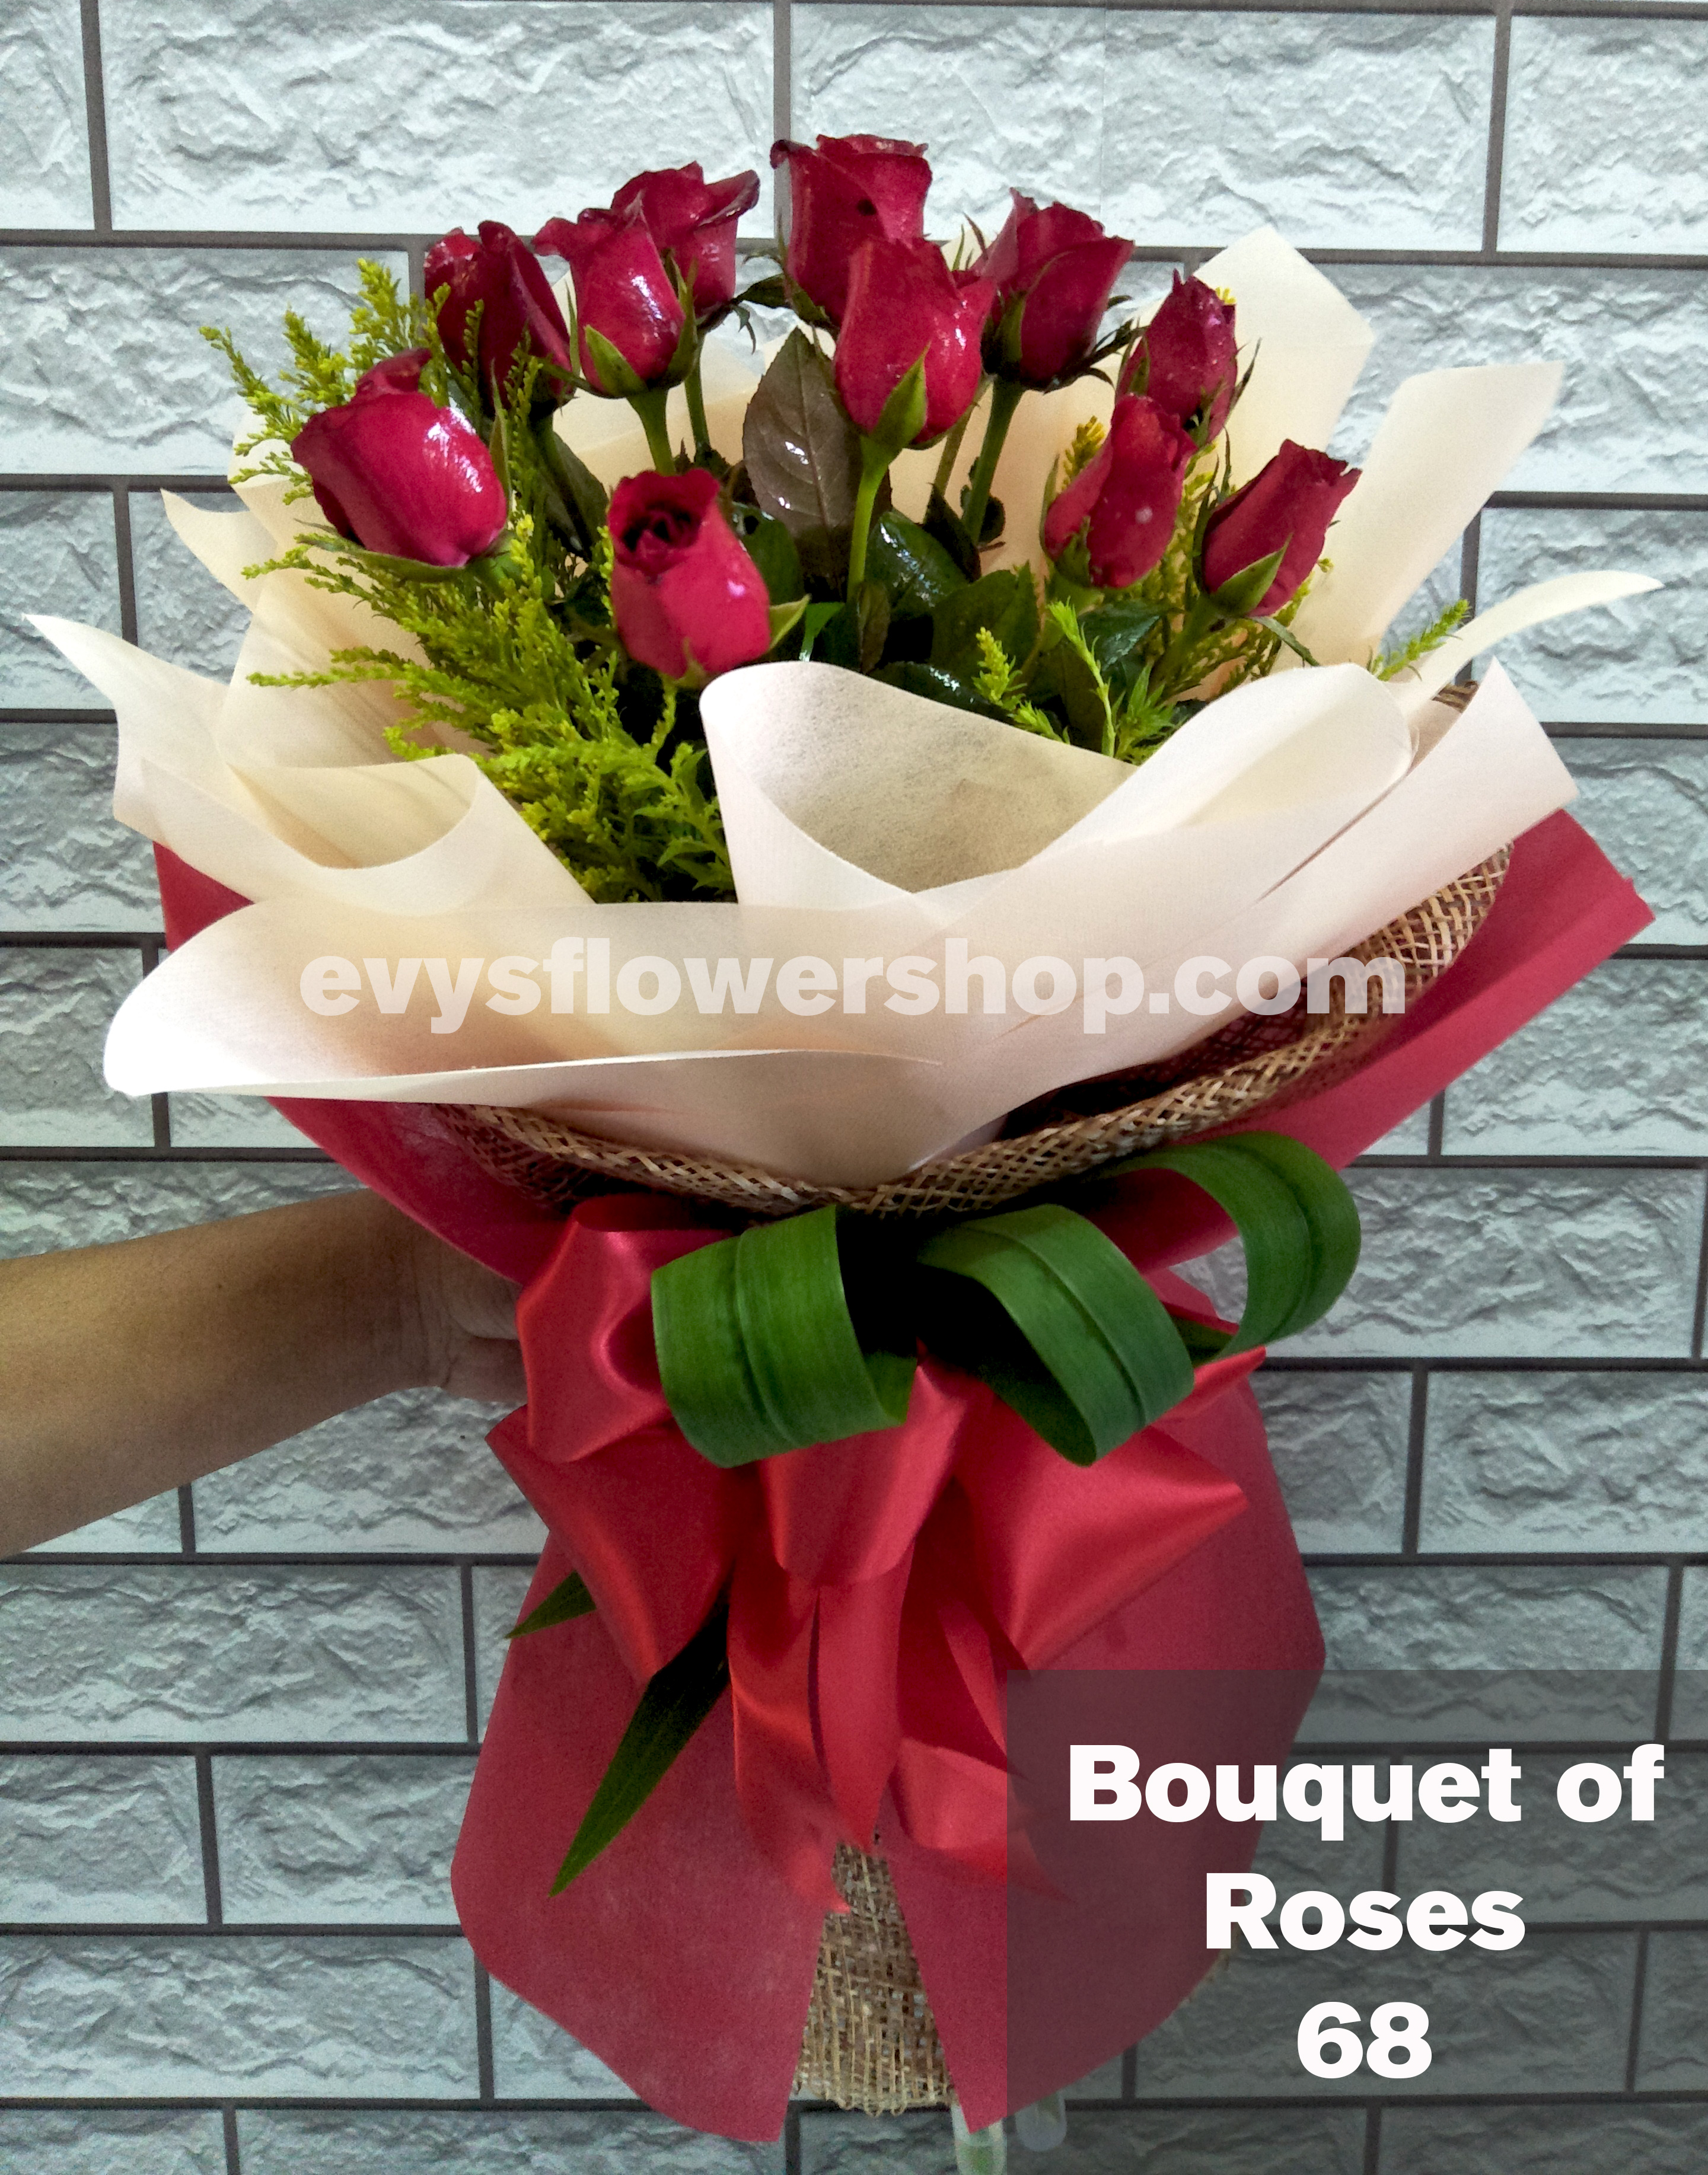 bouquet of roses 68 - EVYS FLOWER SHOP FREE DELIVERY